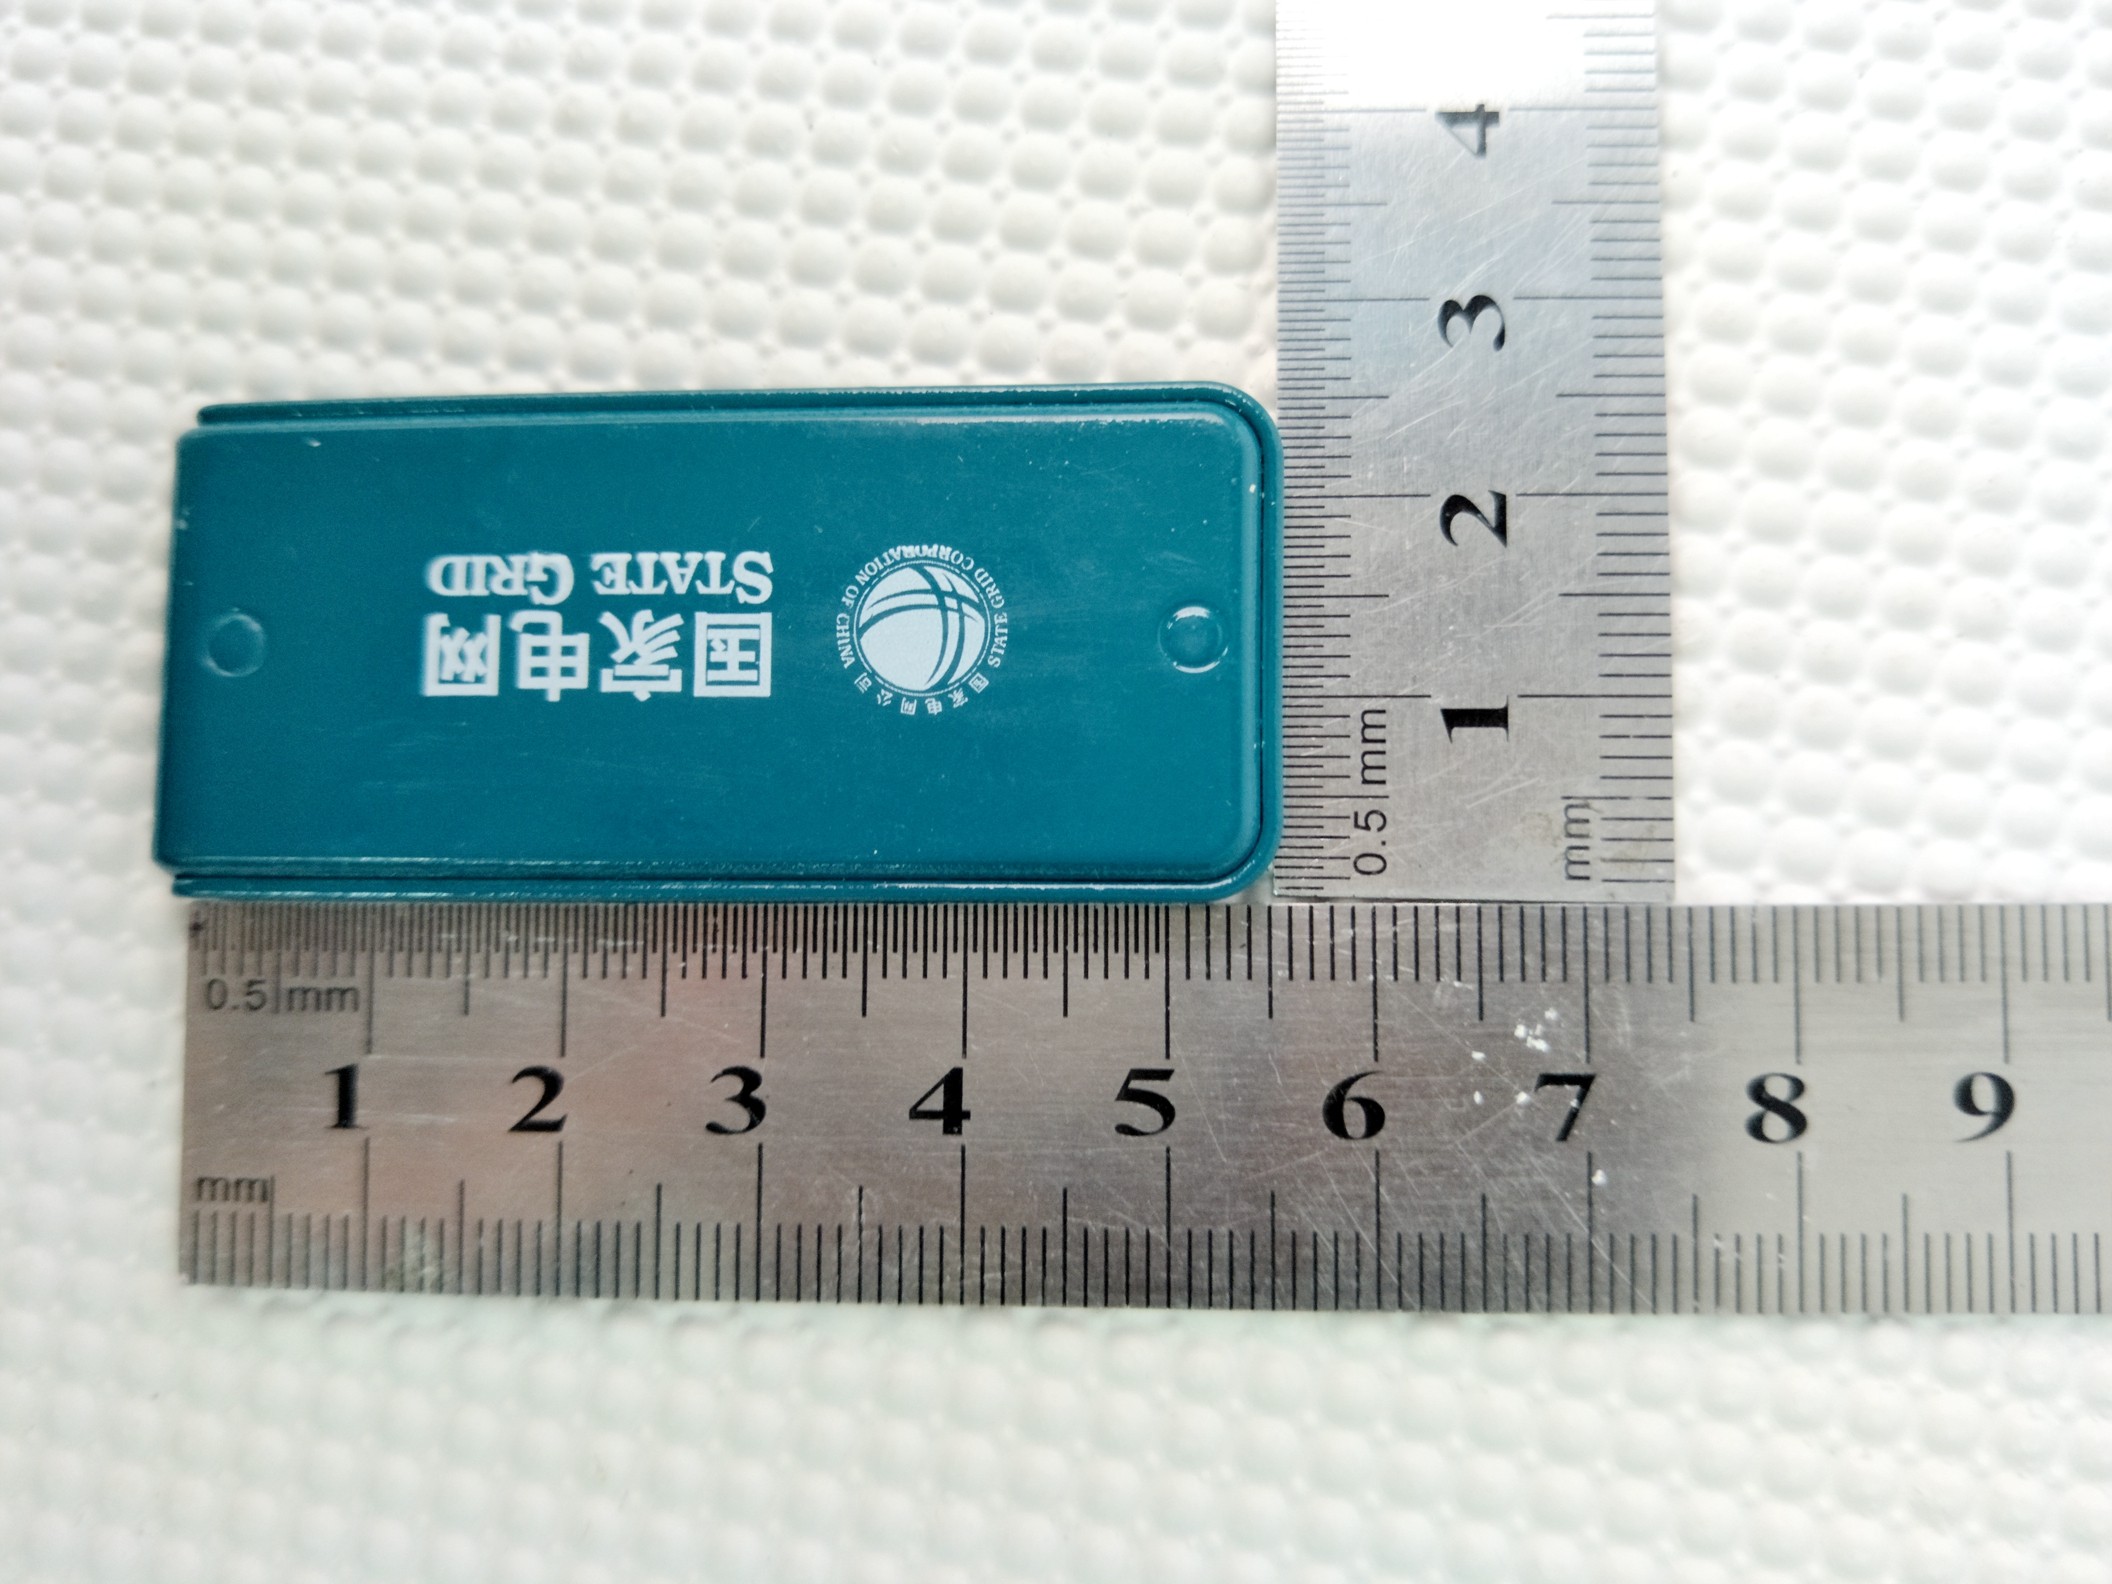 UHF 860~960MHz Anti-metal tag SM318 for warehouse management,,Mold Management,Industrial Manufacturing